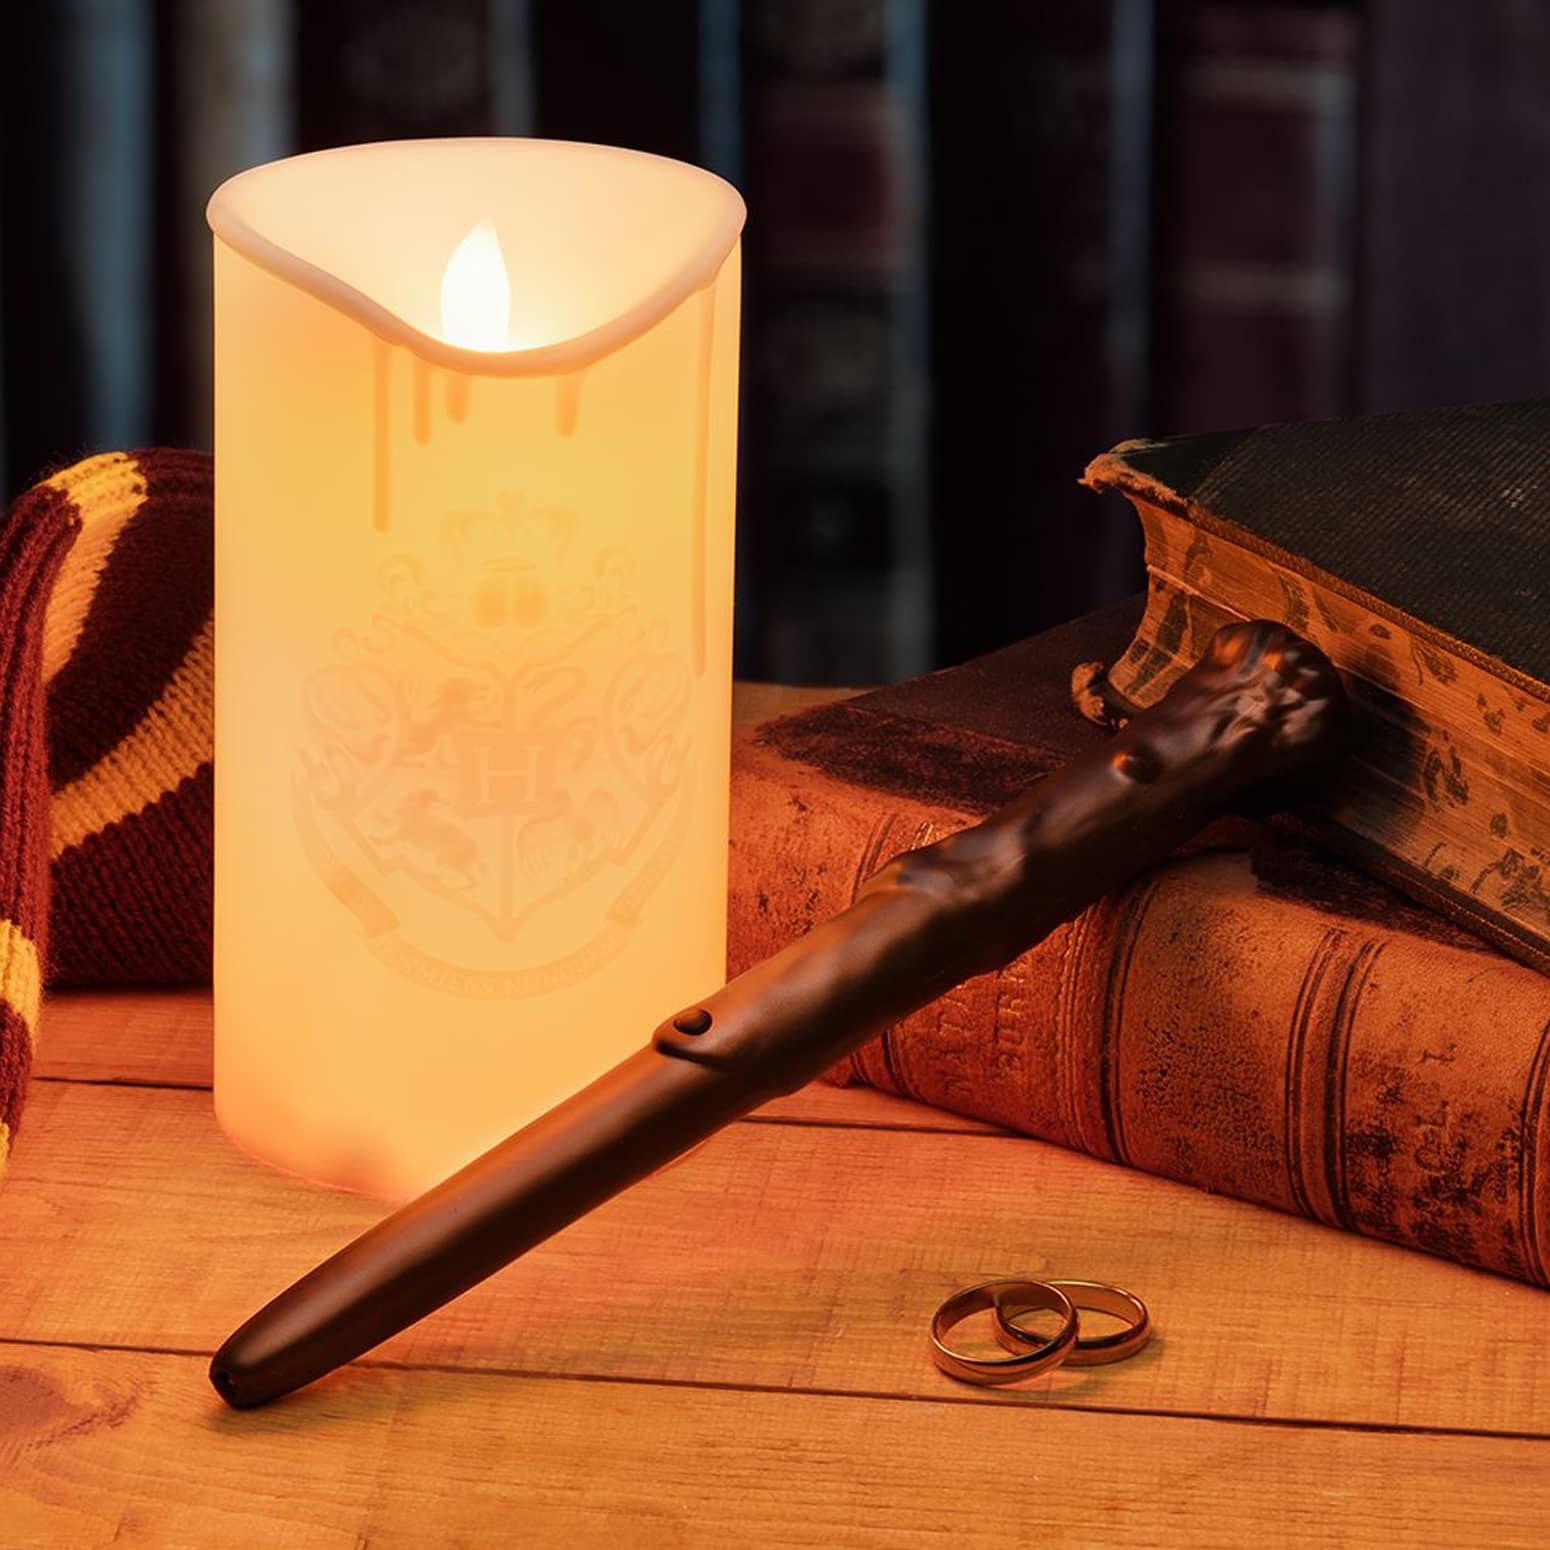 Magical Harry Potter Candle with Wand Remote